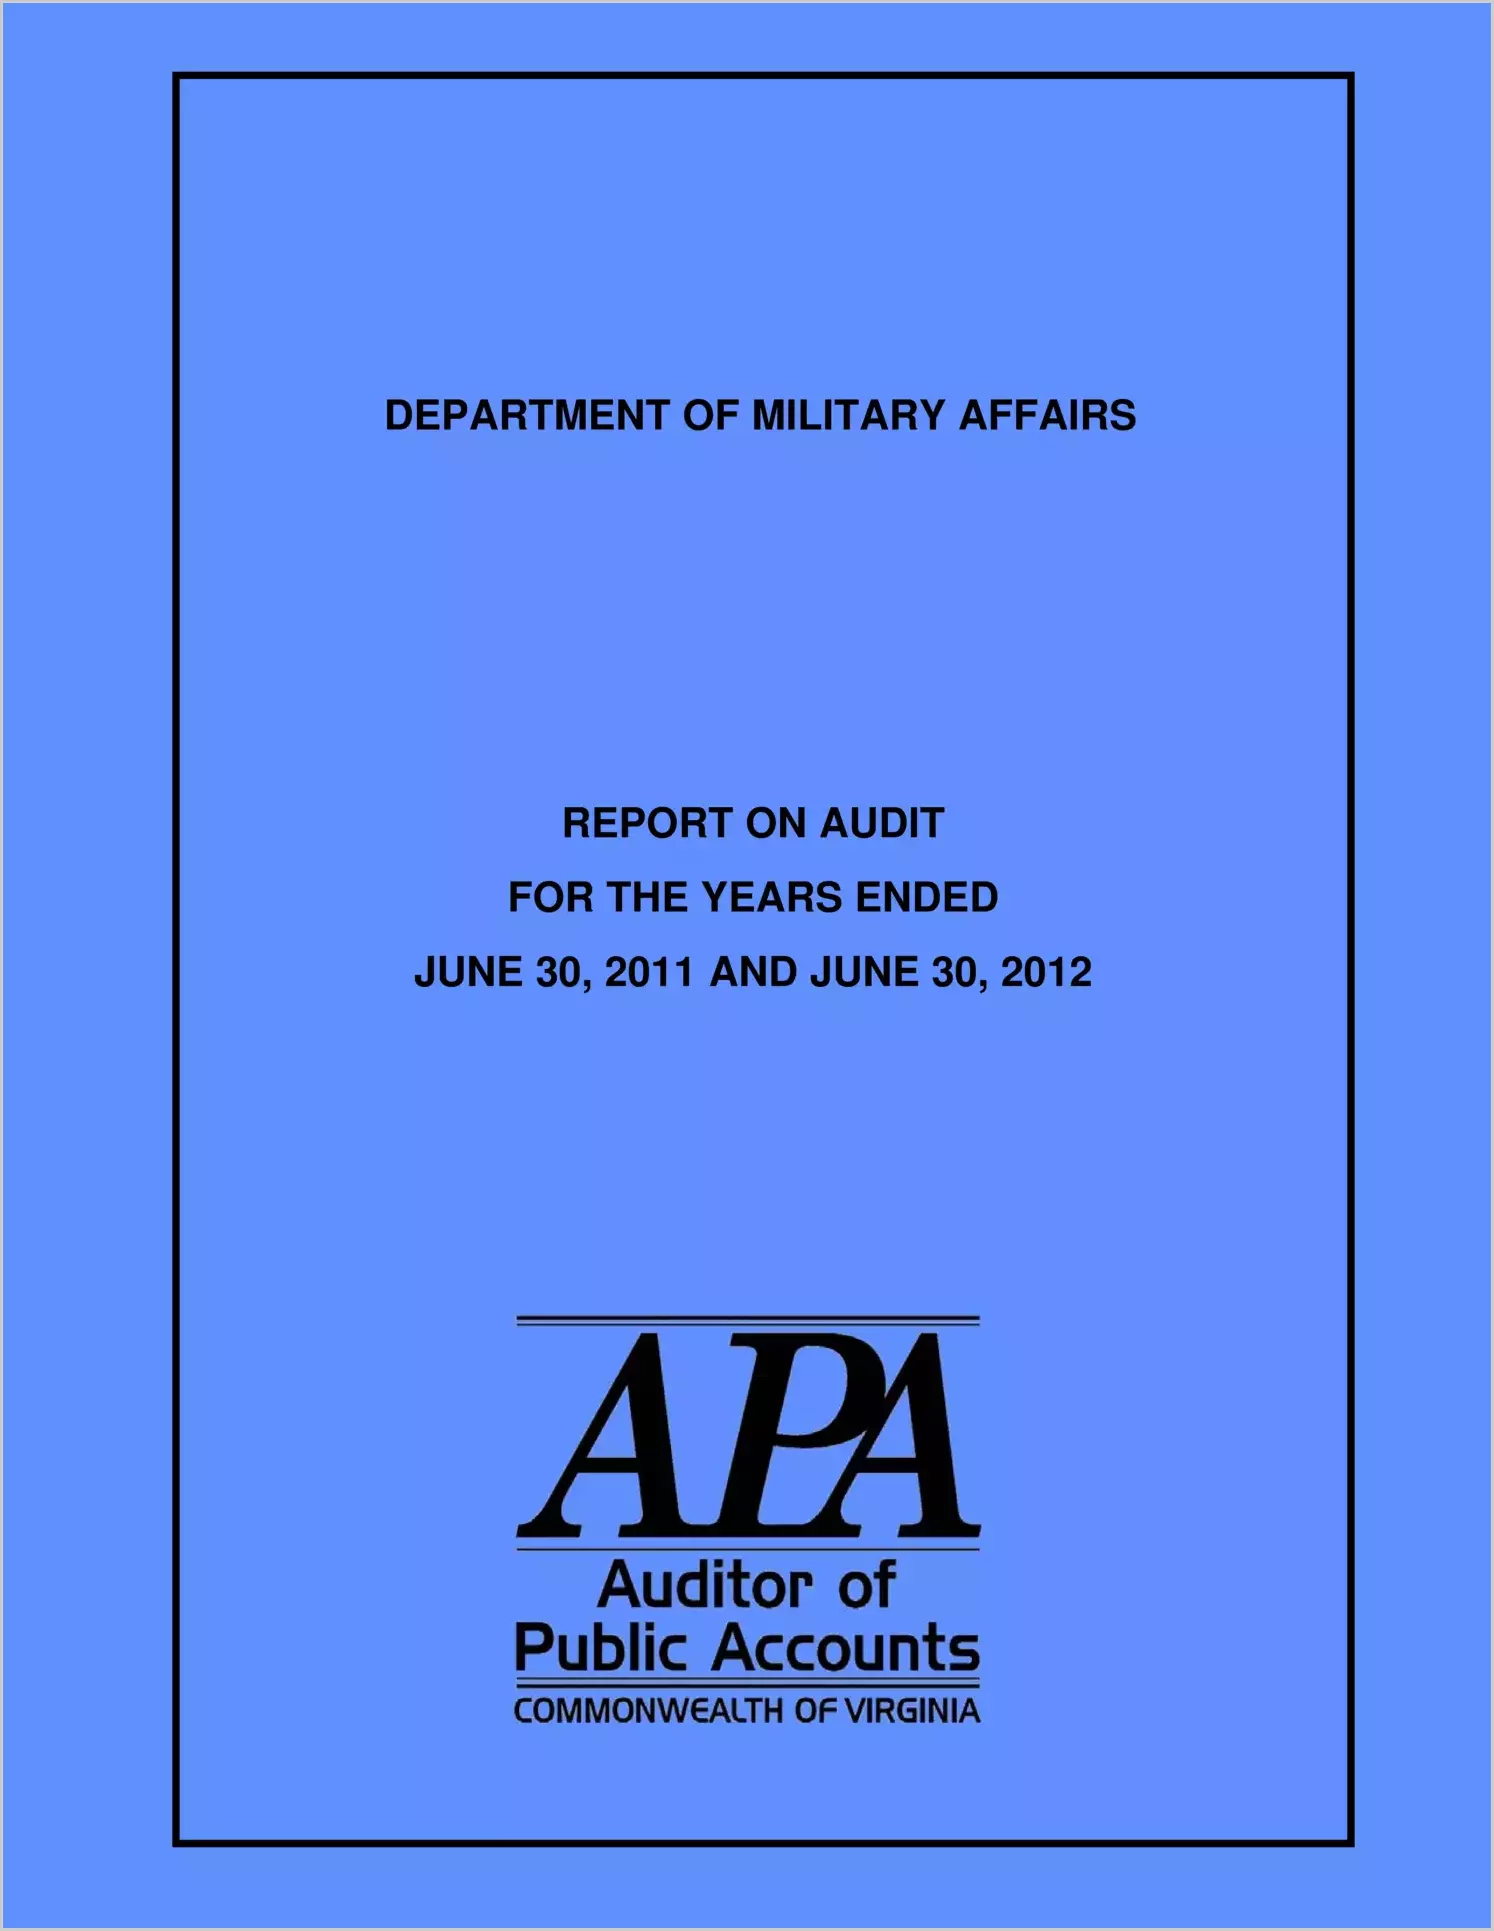 Department of Military Affairs for the years ended June 30, 2011 and 2012